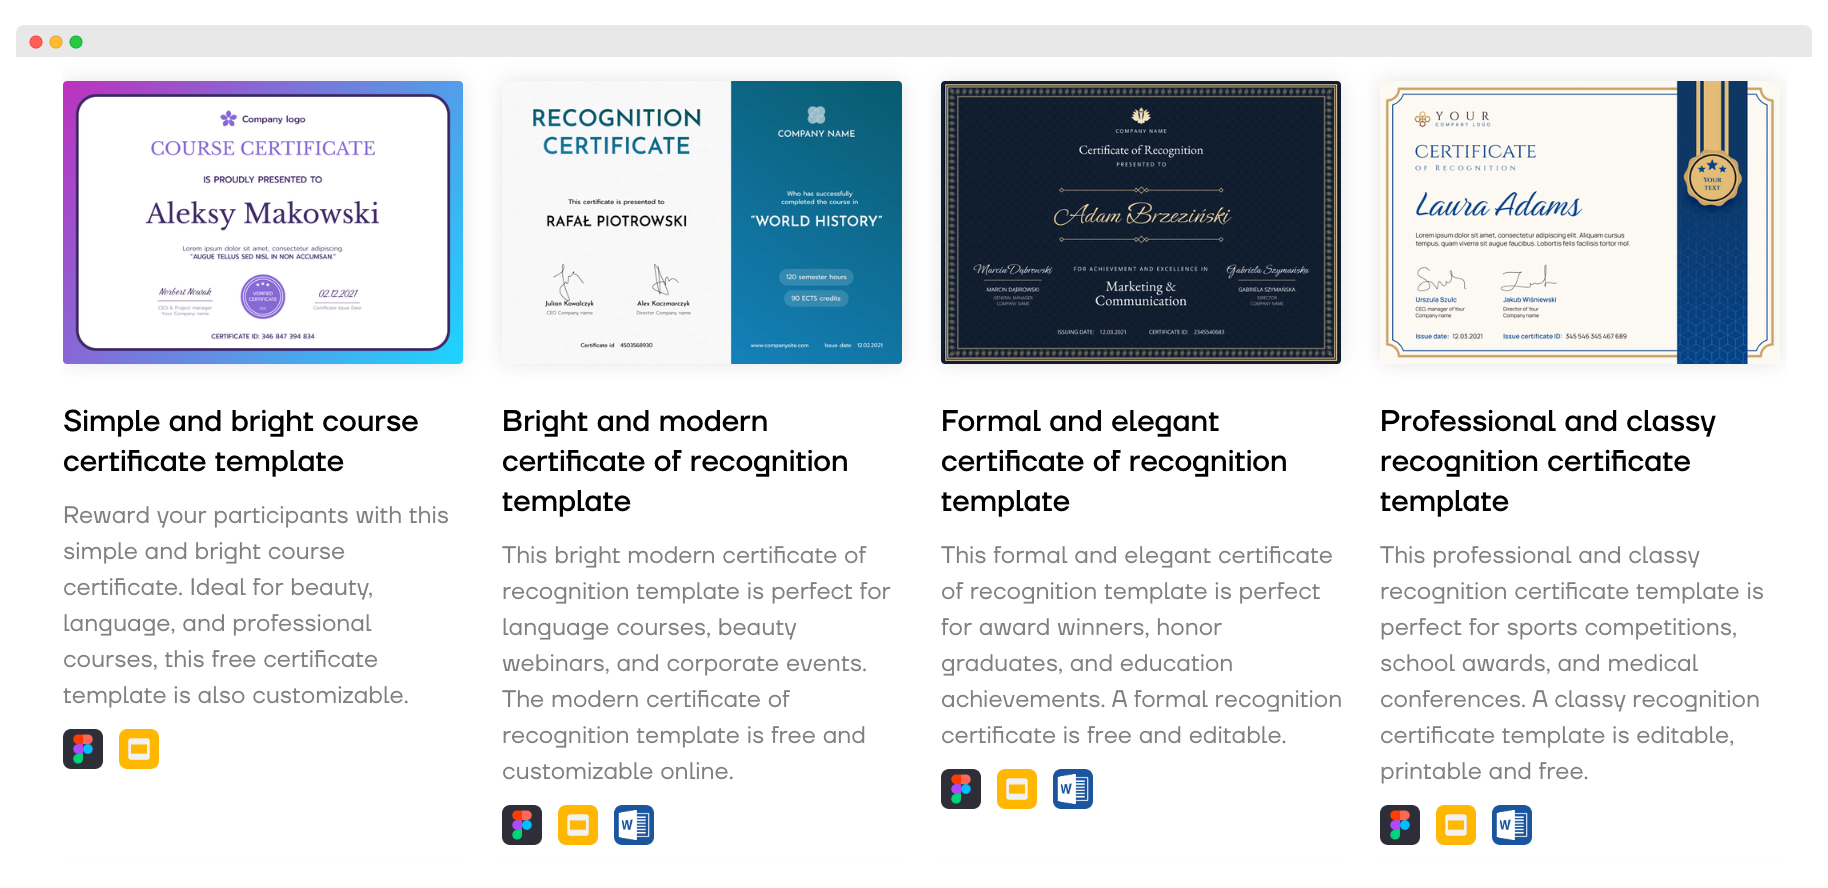 The library of certificate templates available on Certifier.